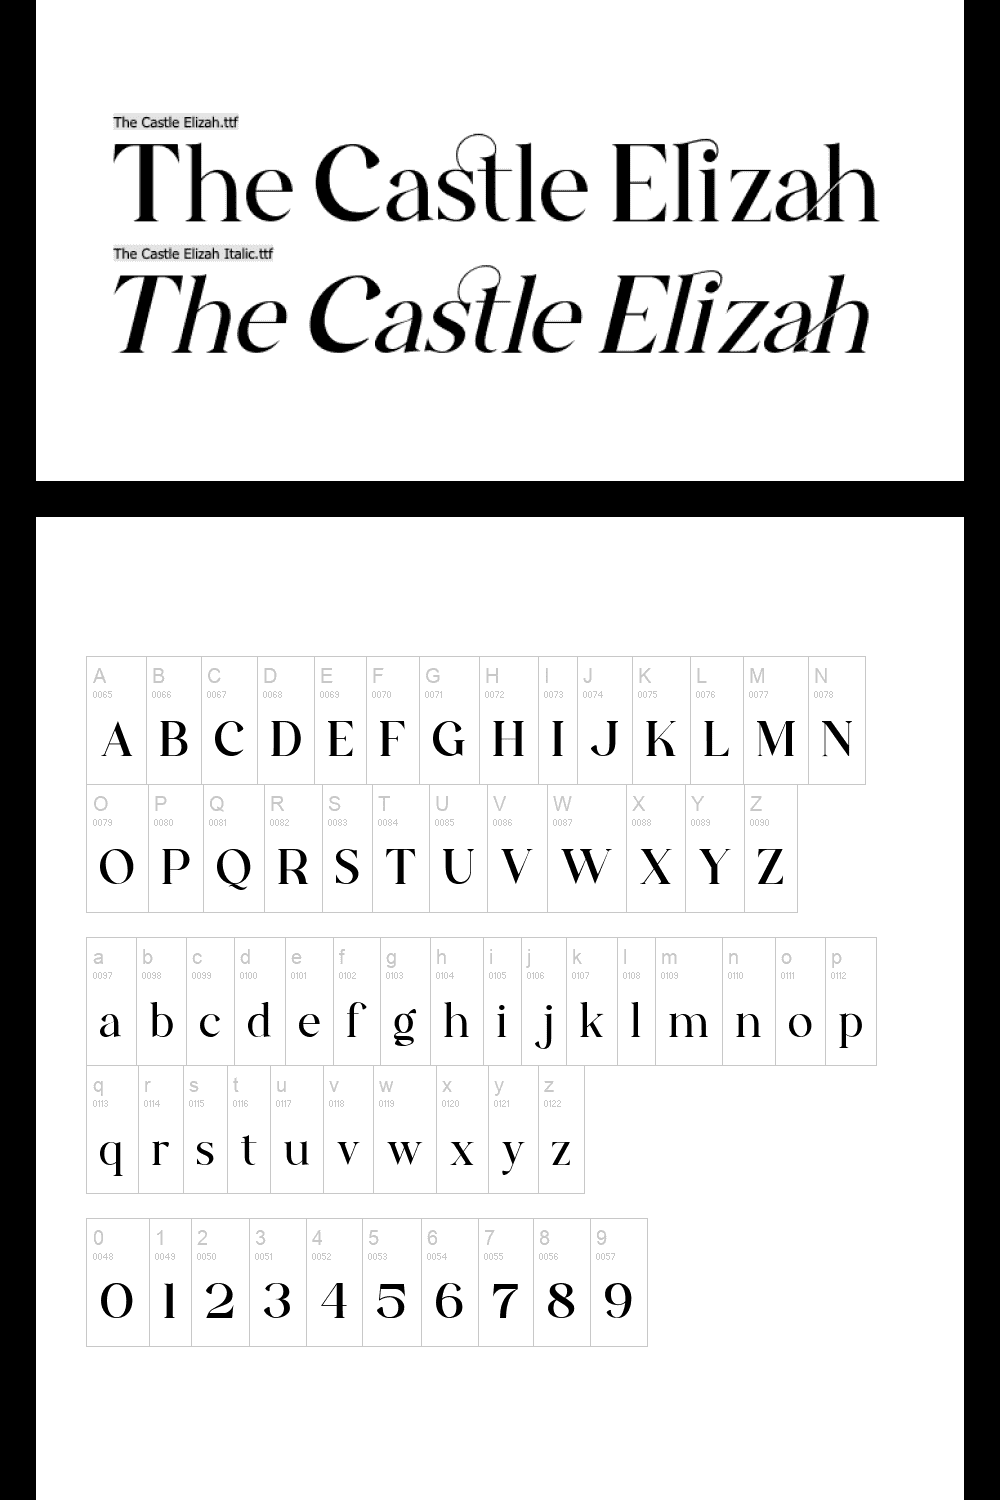 A fabulous font with a magical flavor.